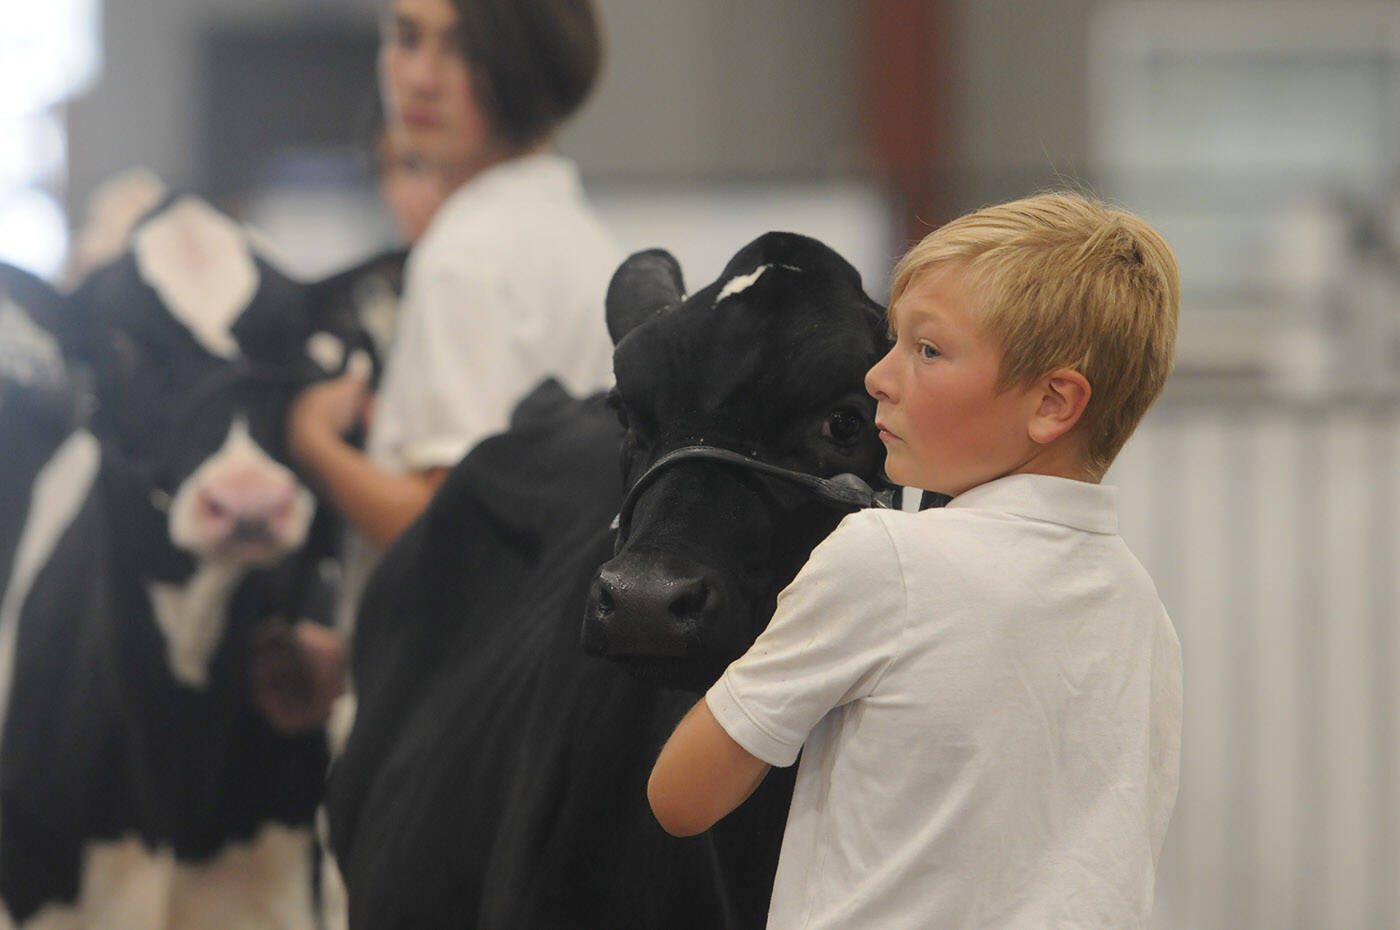 Isaac Bosma, 9, of Chilliwack shows his cow during a 4-H competition at the 150th annual Chilliwack Fair on Friday, Aug. 5, 2022 at Chilliwack Heritage Park. Sunday, Oct. 2, 2022 is World Farm Animals Day. (Jenna Hauck/ Chilliwack Progress file)